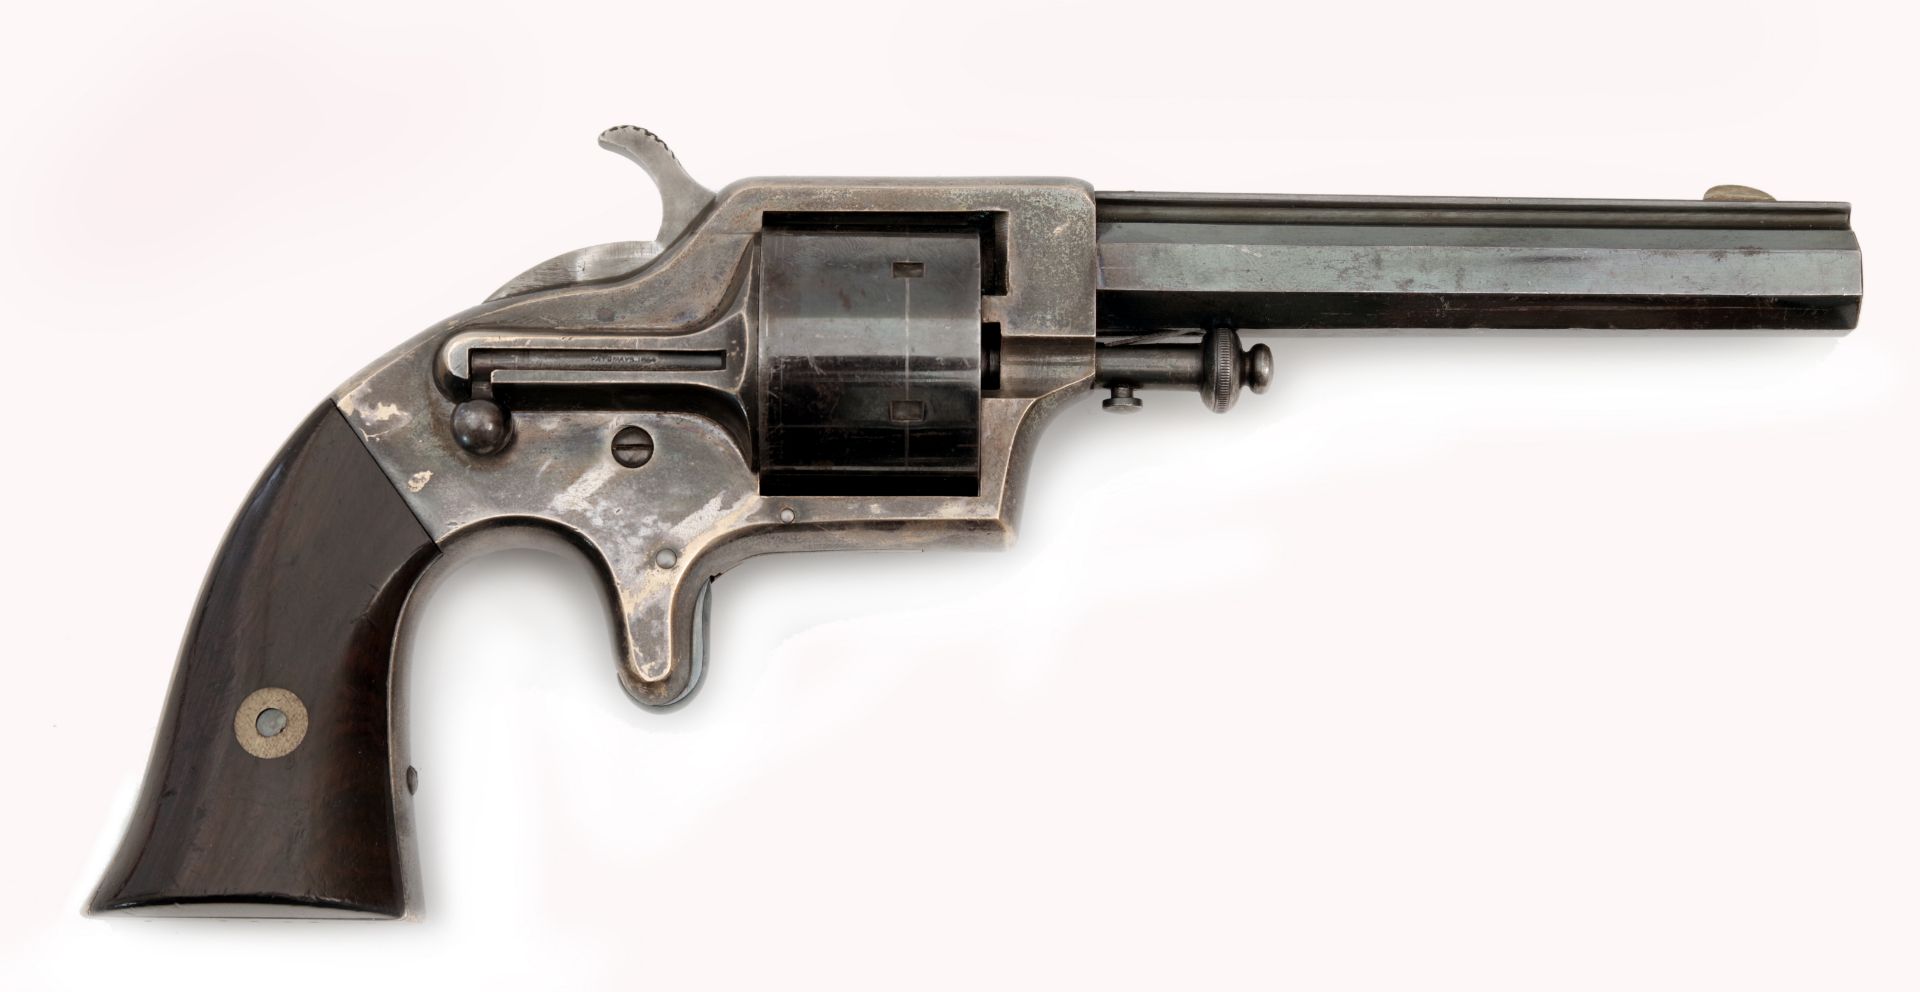 A Merwin & Bray, Plants Patent, 3rd Model Army Front Loading Revolver - Image 2 of 4